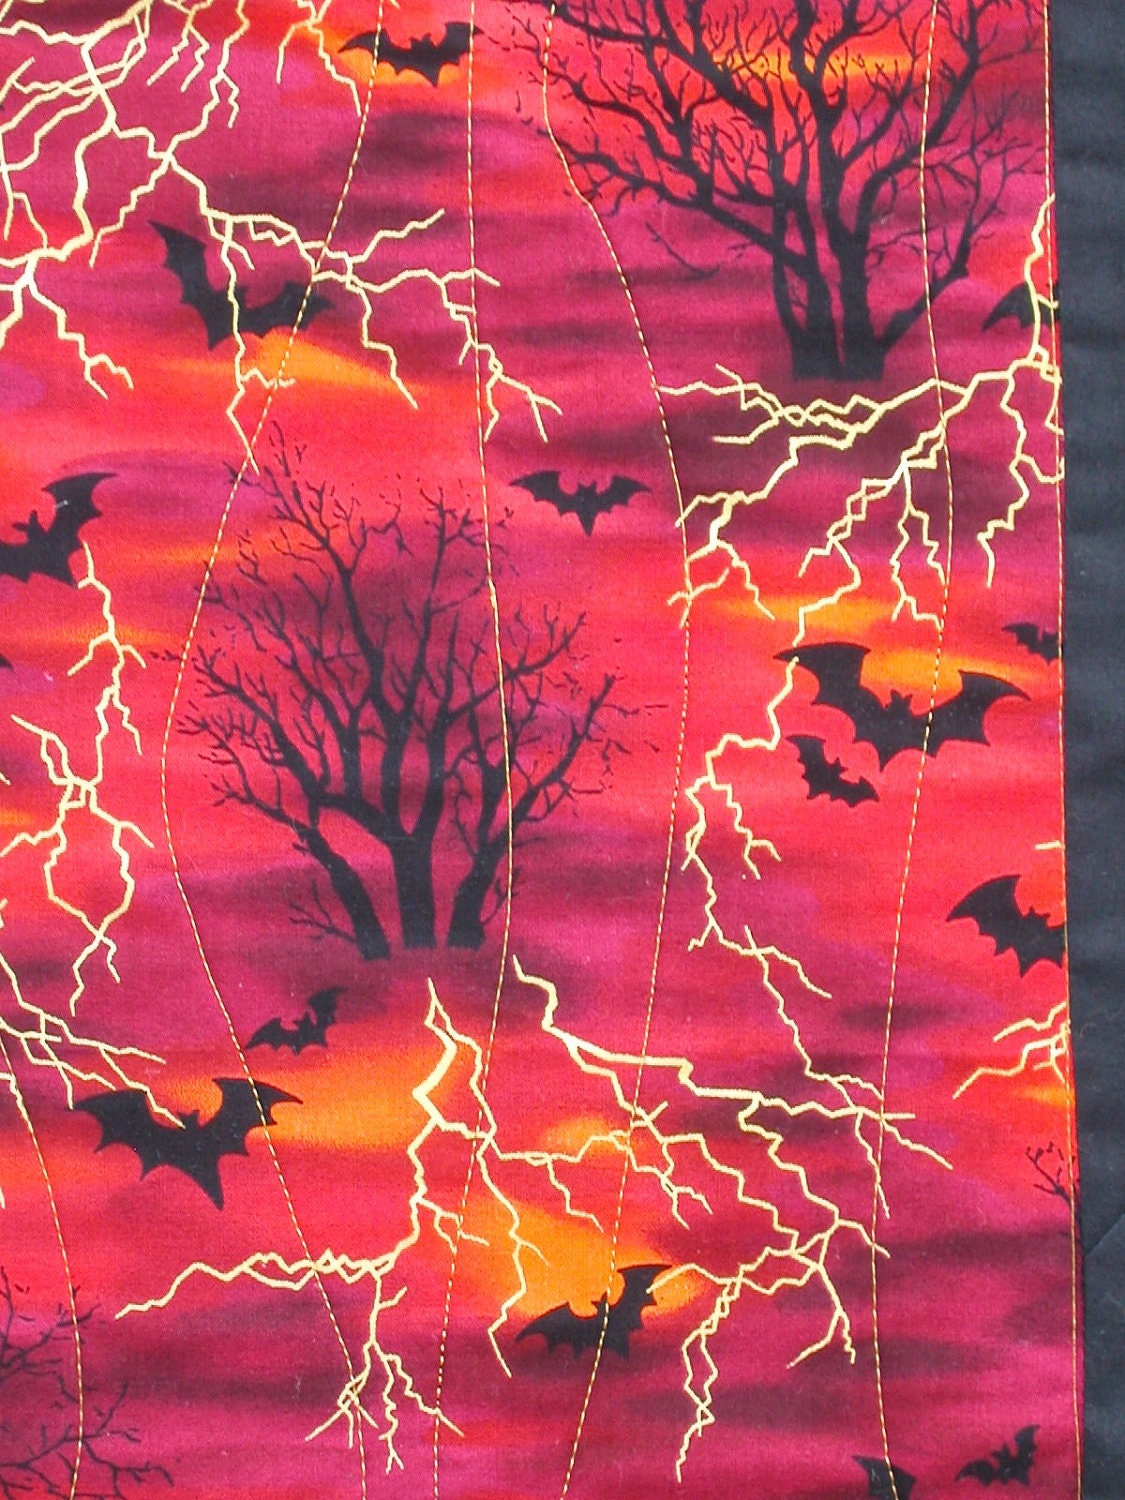 QUILTED HALLOWEEN RUNNER or Wall Hanging with Bats, Trees and Gold Lightning - TessieTextile